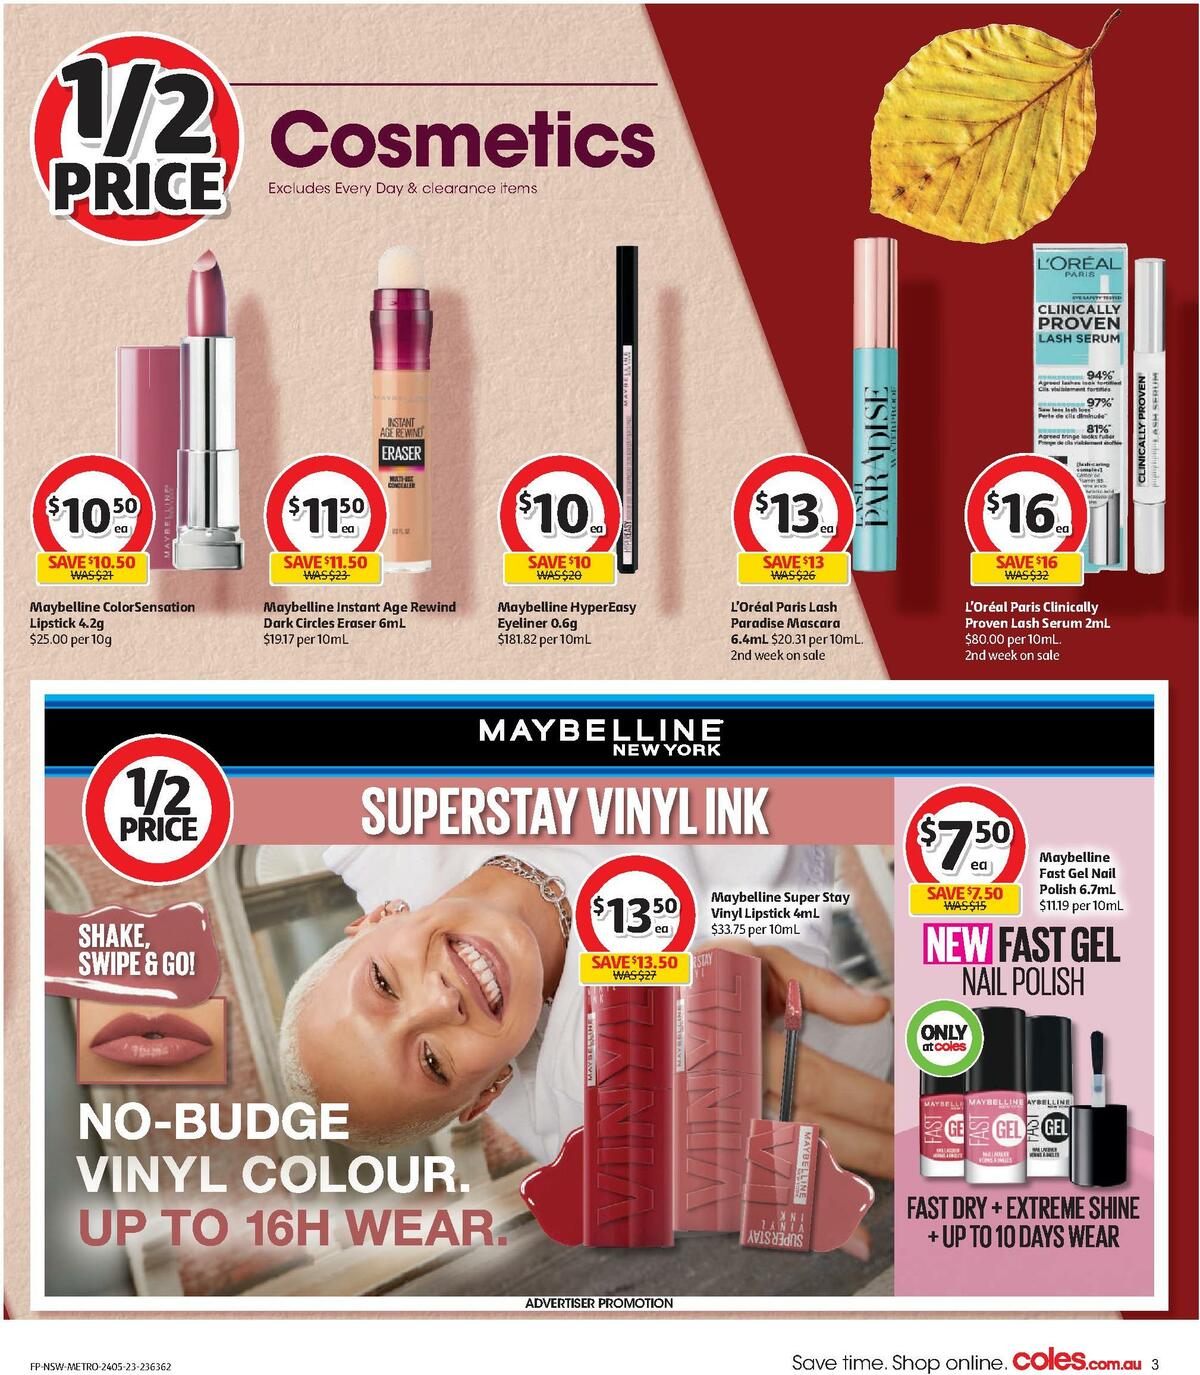 Coles Health & Beauty NSW METRO Catalogues from 24 May